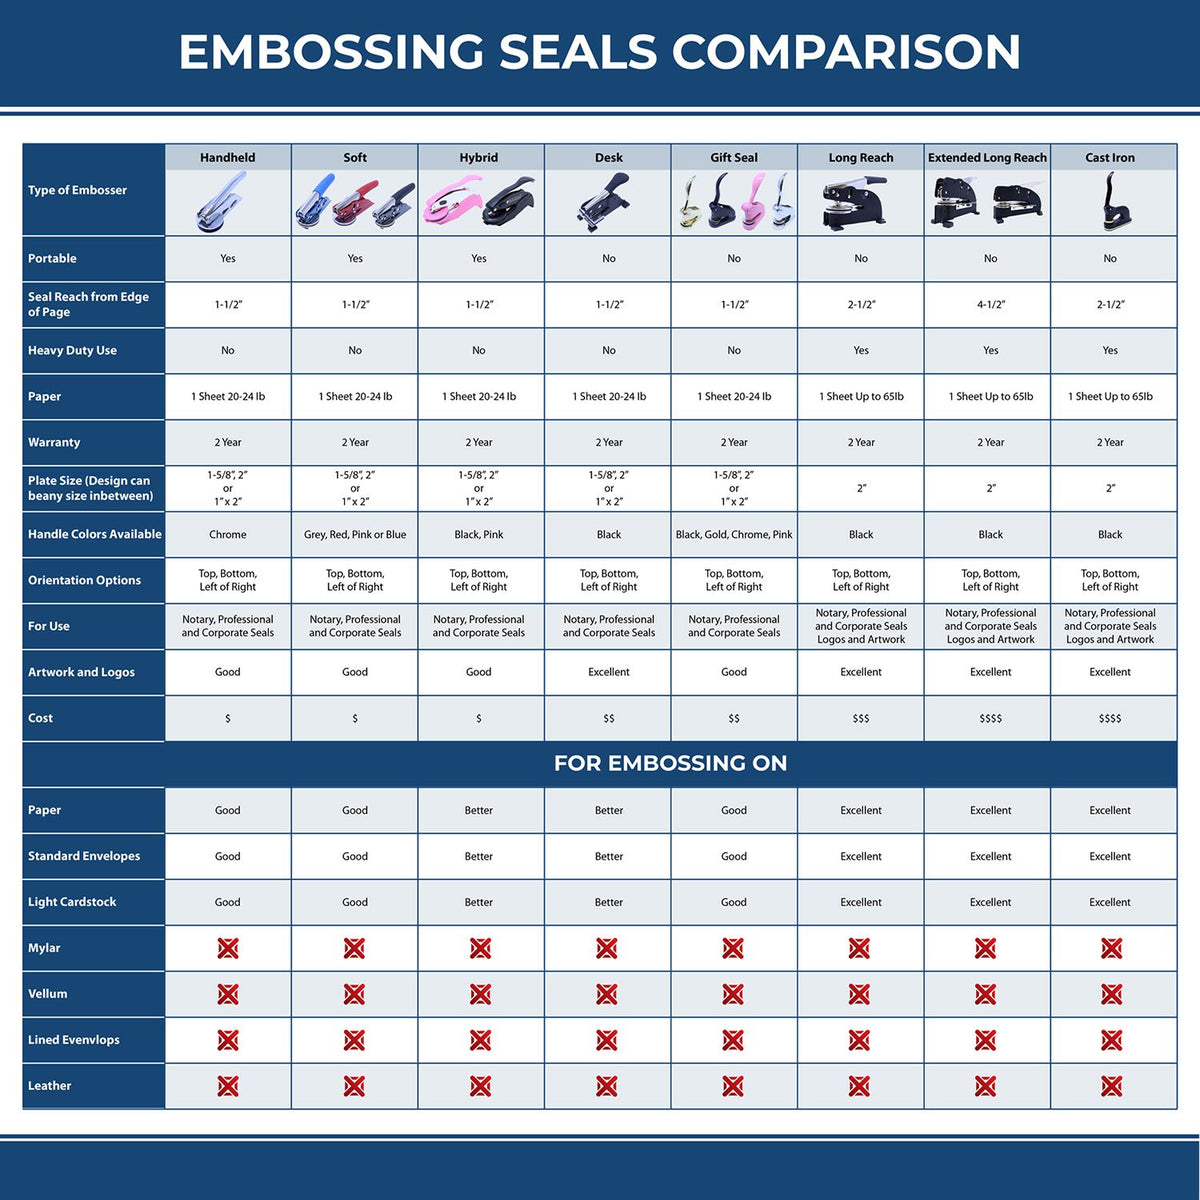 A comparison chart for the different types of mount models available for the Heavy Duty Cast Iron District of Columbia Architect Embosser.